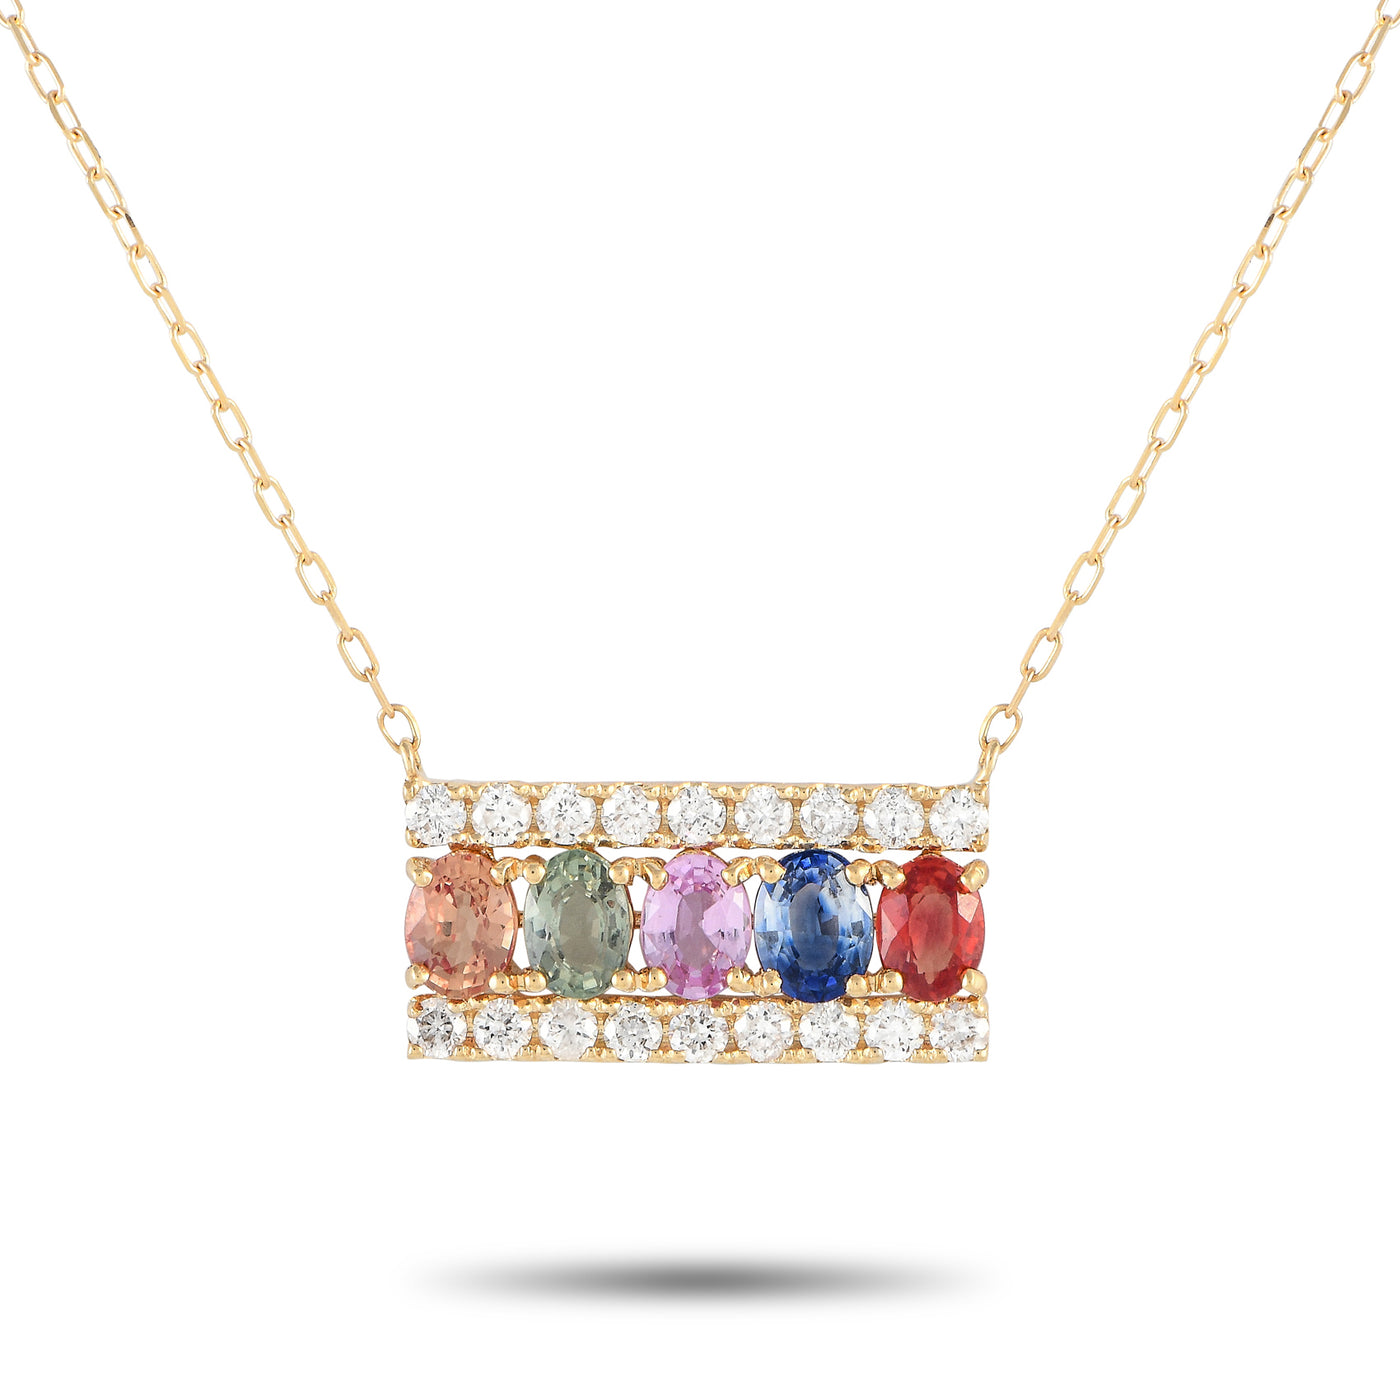 18K Yellow Gold 0.32ct Diamond and Multicolored Sapphire Necklace